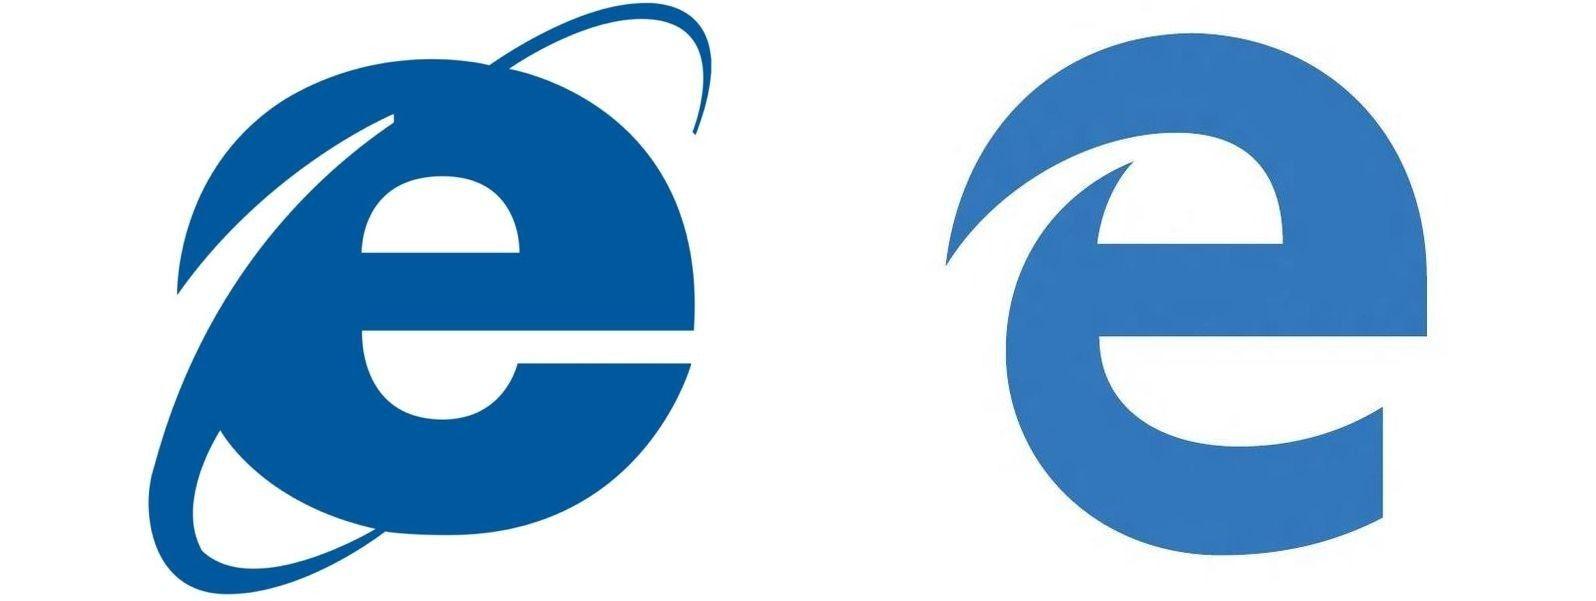 Web Browser Logo - The logo for the Microsoft Edge web browser looks very familiar ...